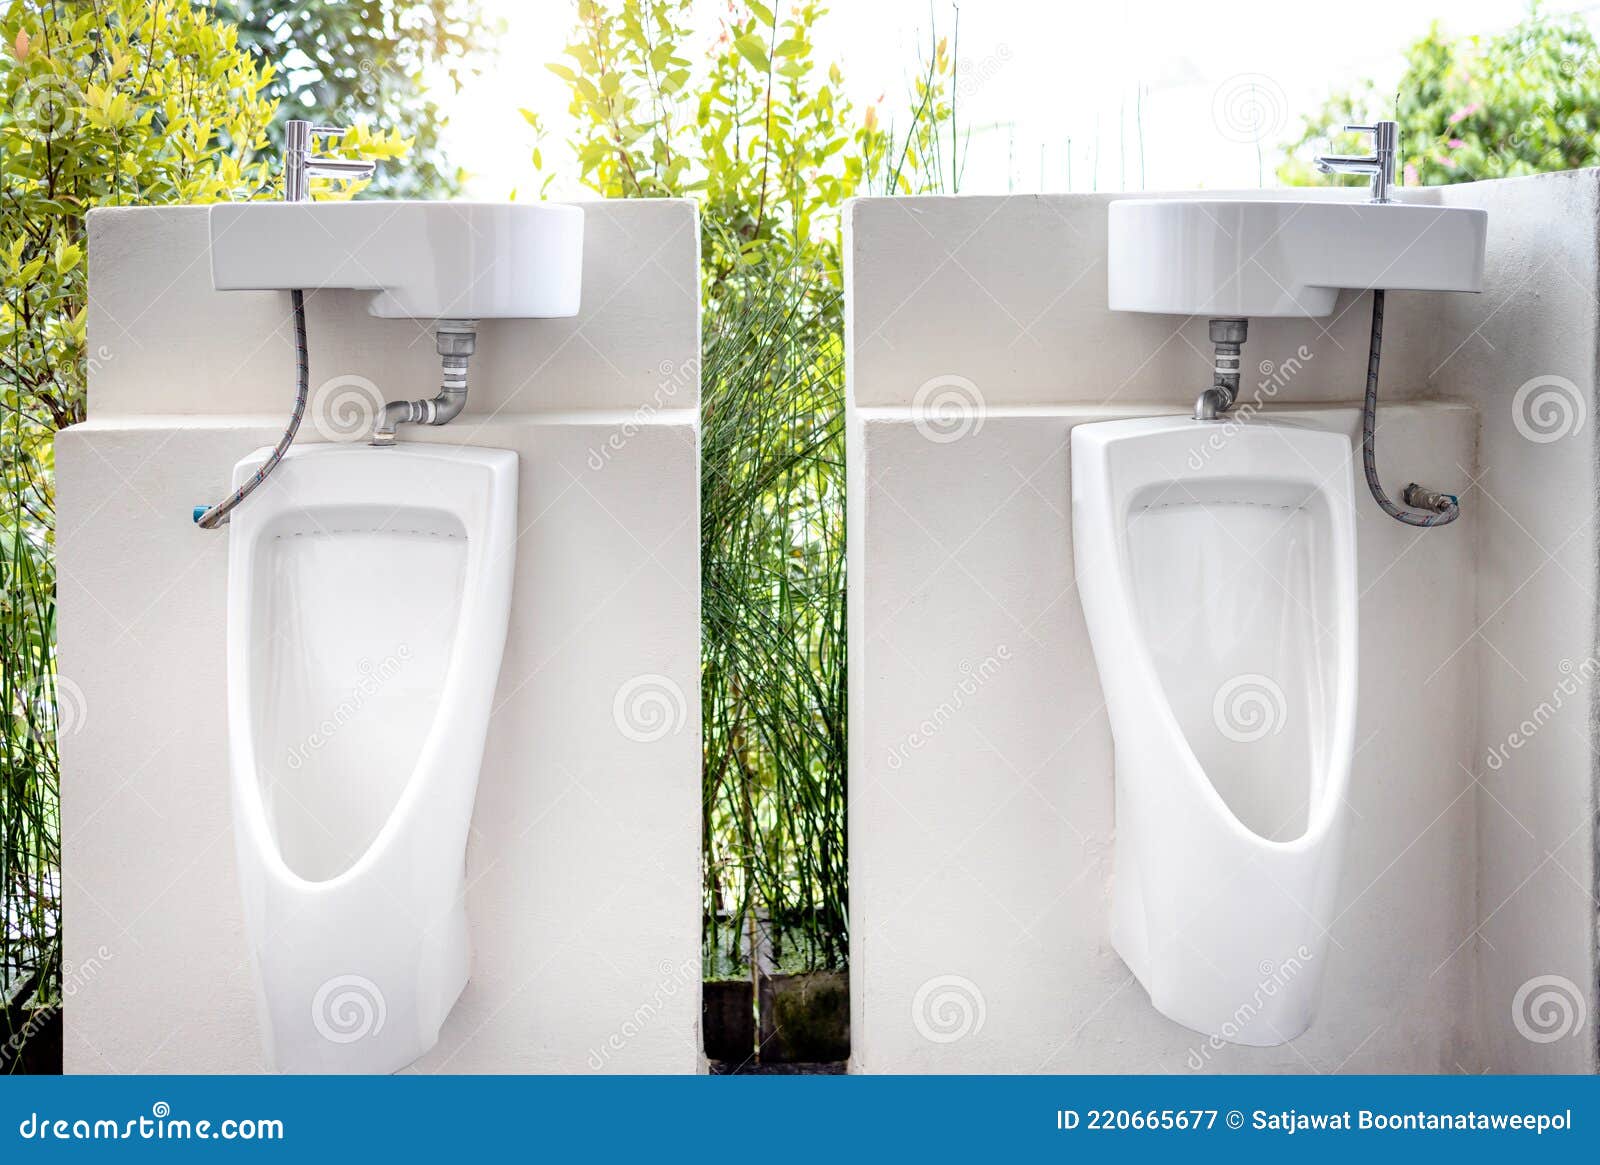 urinals for men to urinate and hand washing point in the male toilet at park,white urinal with a sink on top of the urinal to